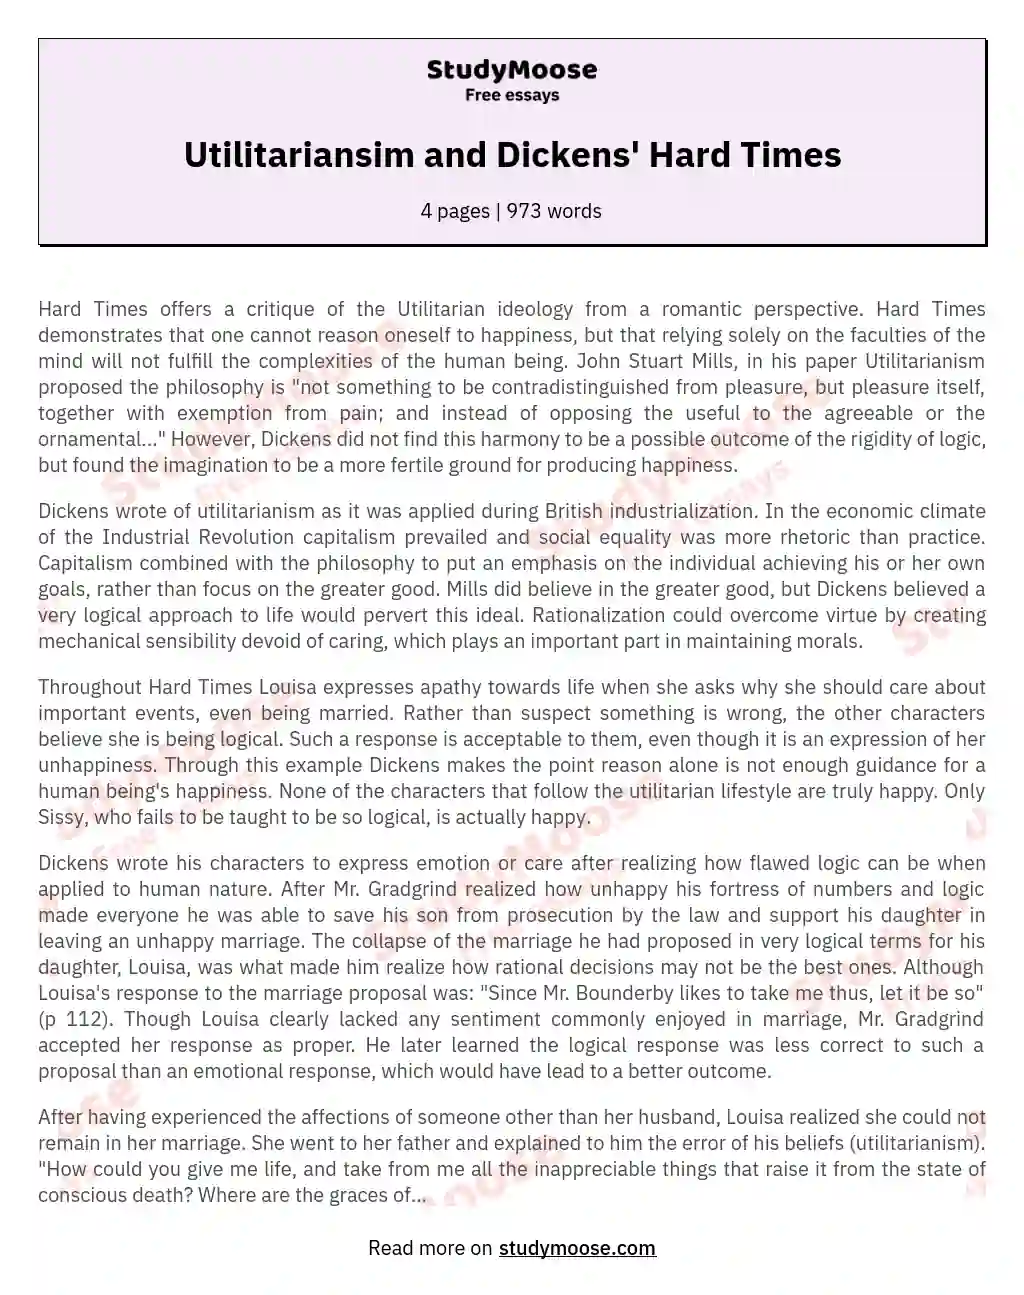 Utilitariansim and Dickens' Hard Times essay